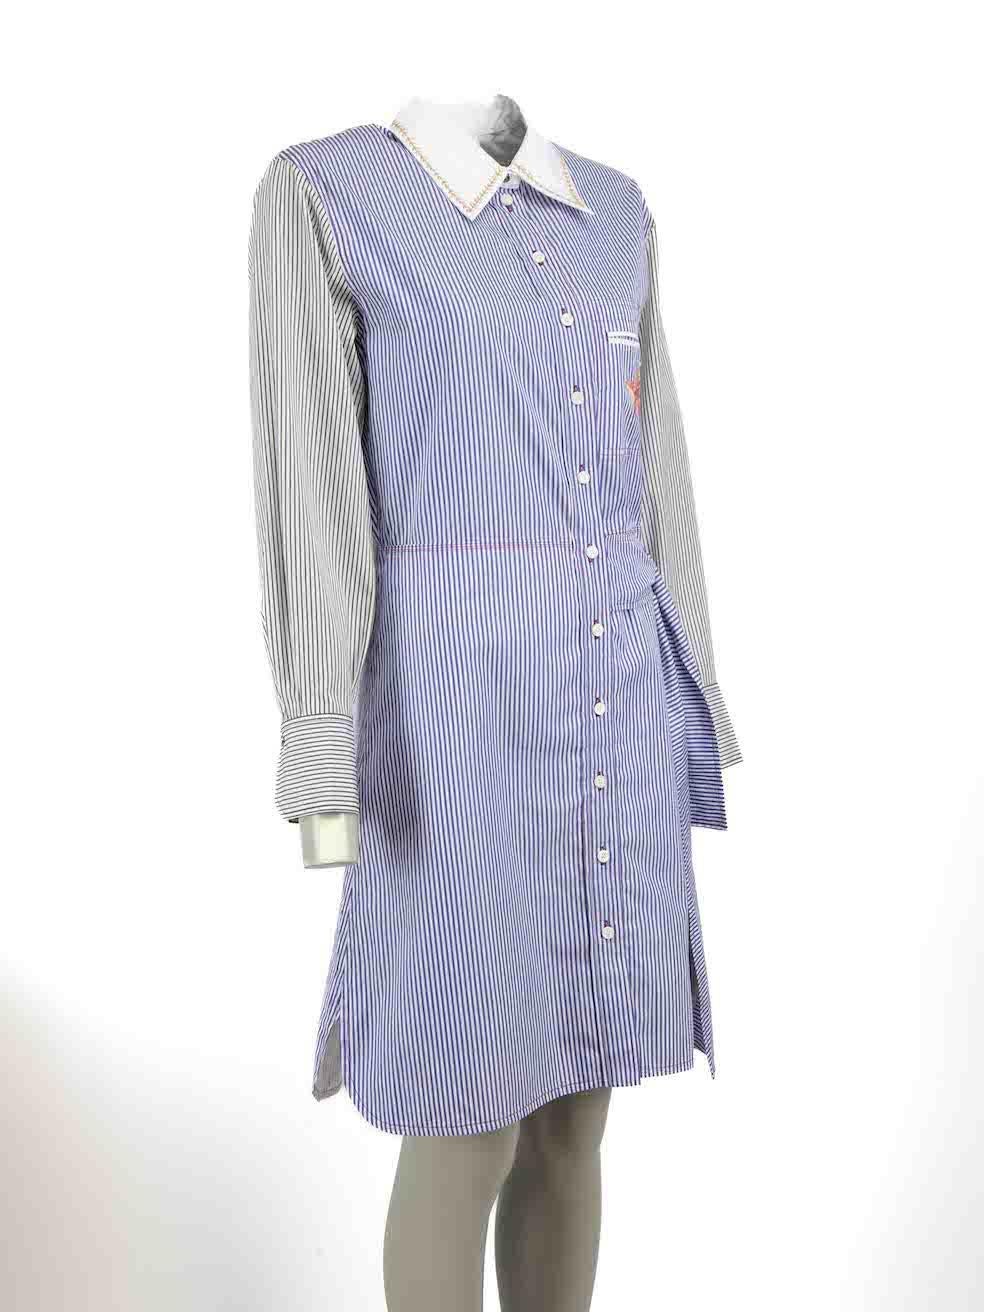 CONDITION is Very good. Hardly any visible wear to dress is evident on this used Chloe designer resale item.
  
Details
Multicolour
Cotton
Shirt dress
Blue, white and black striped
Long sleeves
Midi
Round neck
Embroidered detail
Button